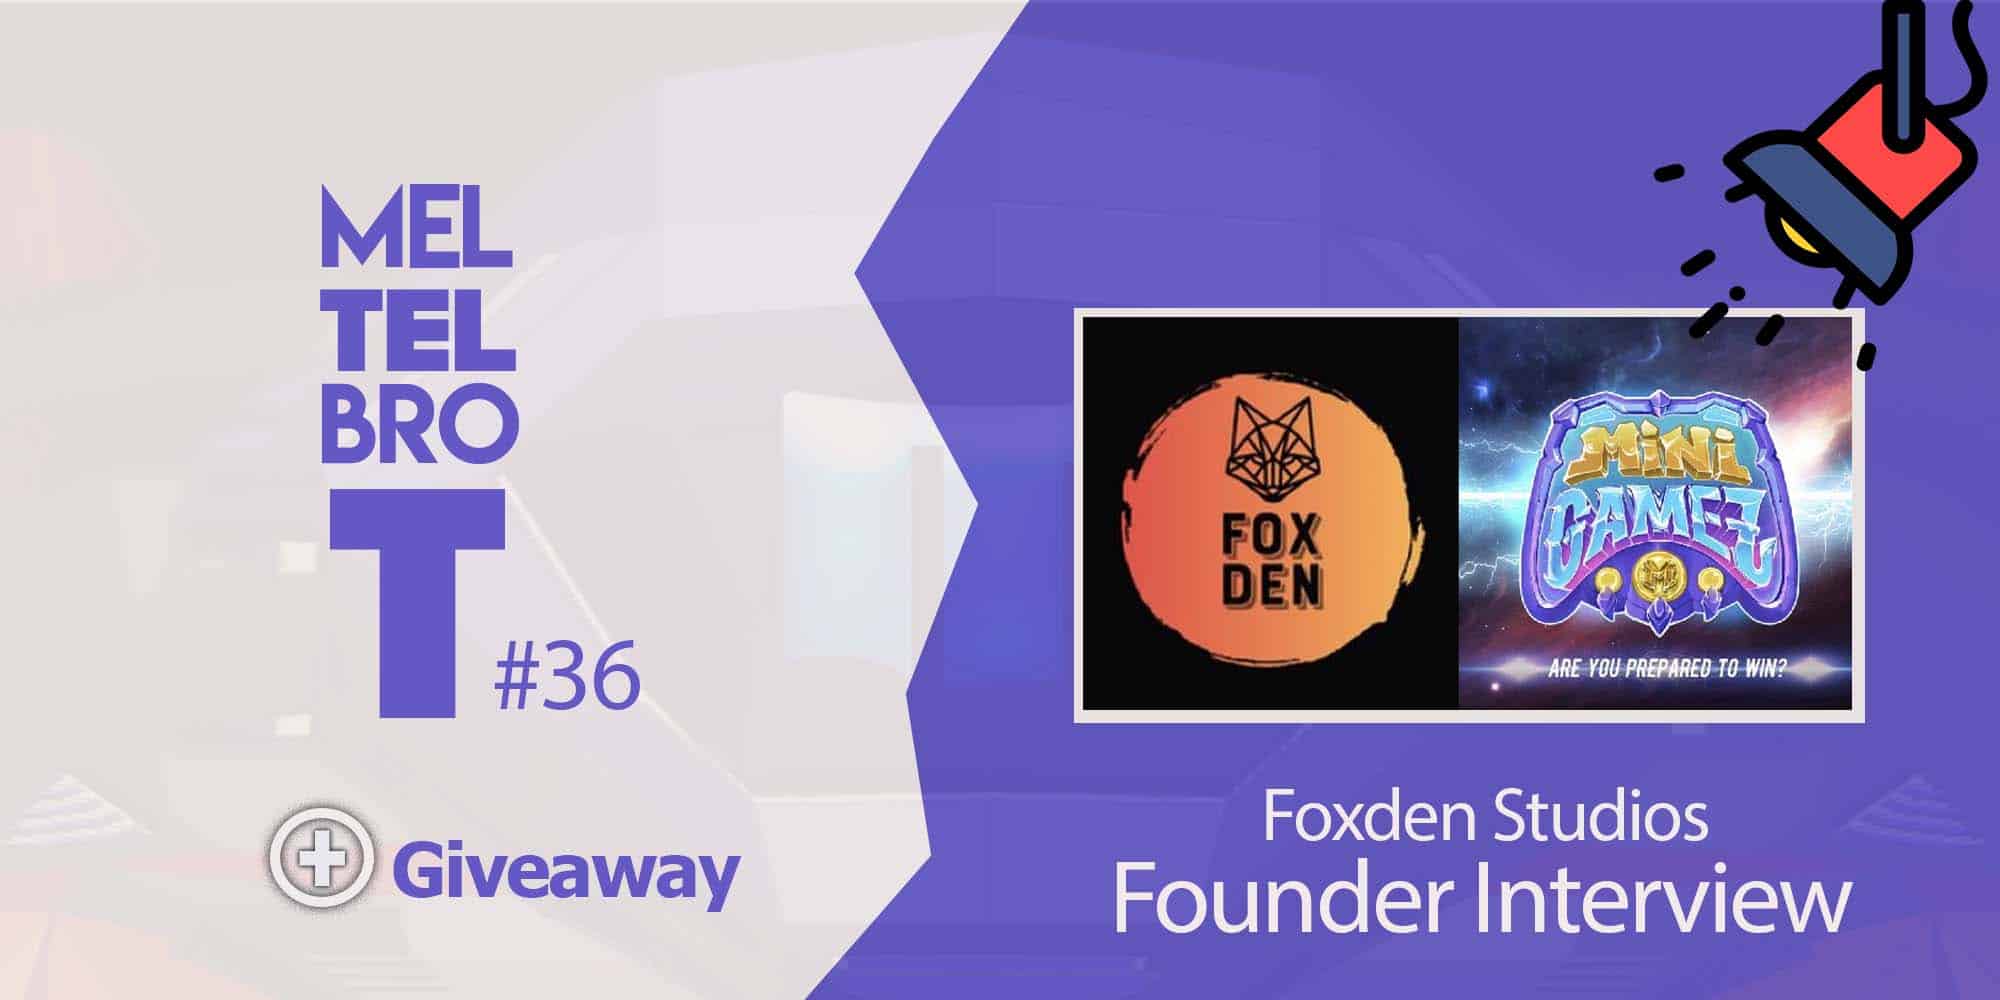 BLUE WHITE 21 Today I’m chatting with Fox, the man…or fox ;) behind foxdenstudios.io, who have developed a new and organized giveaway service and tool for community managers and other game developers to engage with their supporters and gamers. Taken from the website, they intend to create an engaging gaming environment that is fair, fun and innovative. Seeing how giveaways in this evolving space can be a little unrefined and not so engaging, Fox Den aims to change the way giveaways are handled and create a different experience altogether.